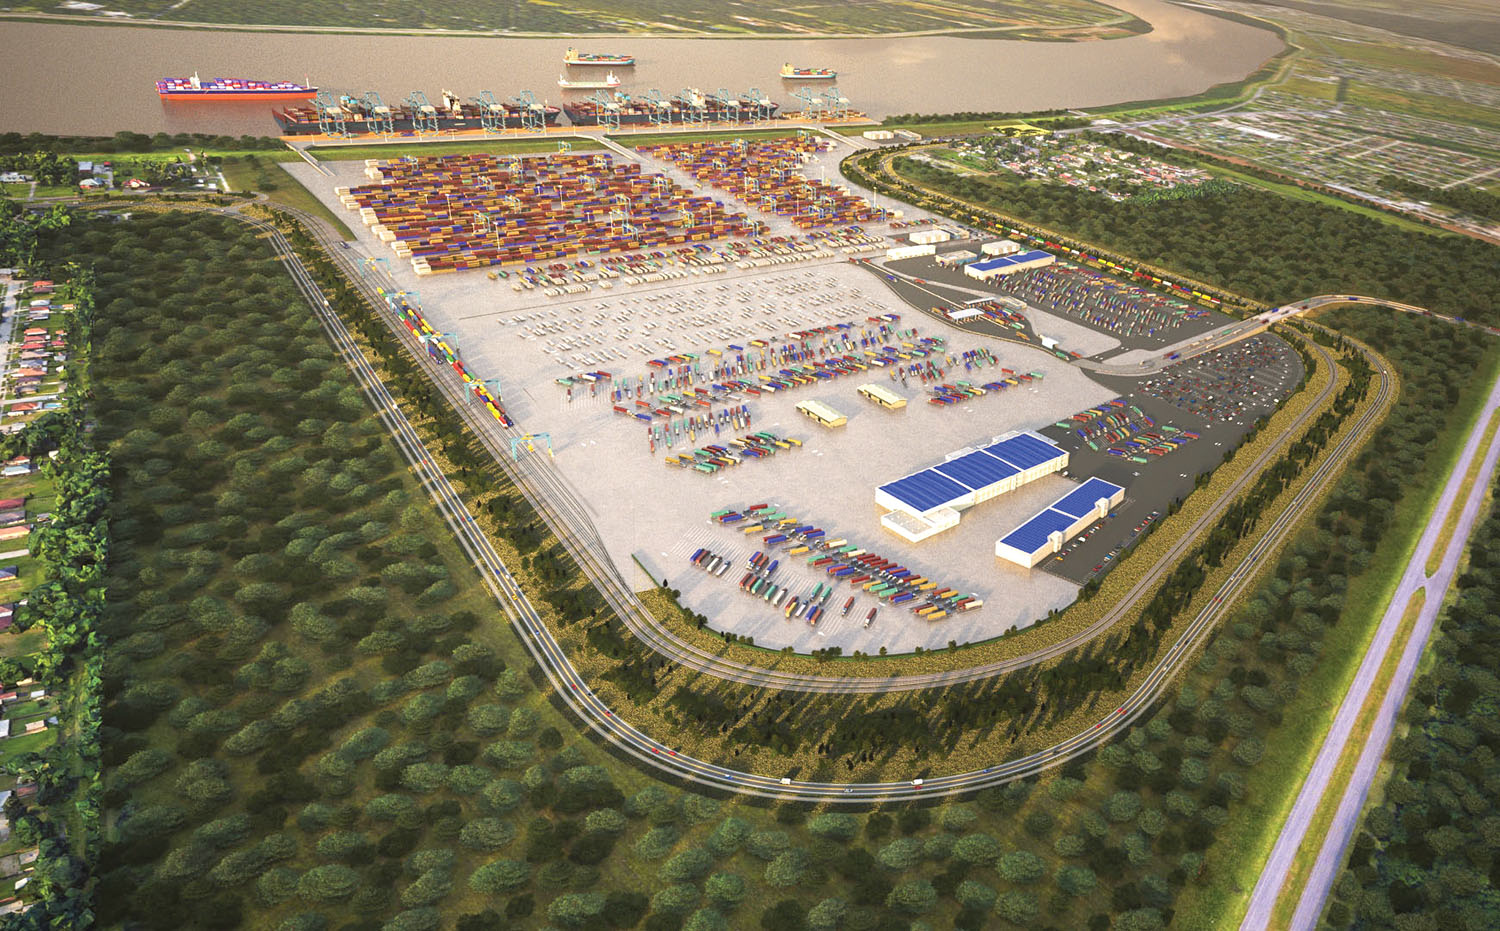 A conceptual rendering of the layout at the planned new facility of the Port of New Orleans in Violet, La. The land is acquired, but permitting still needs to be completed.